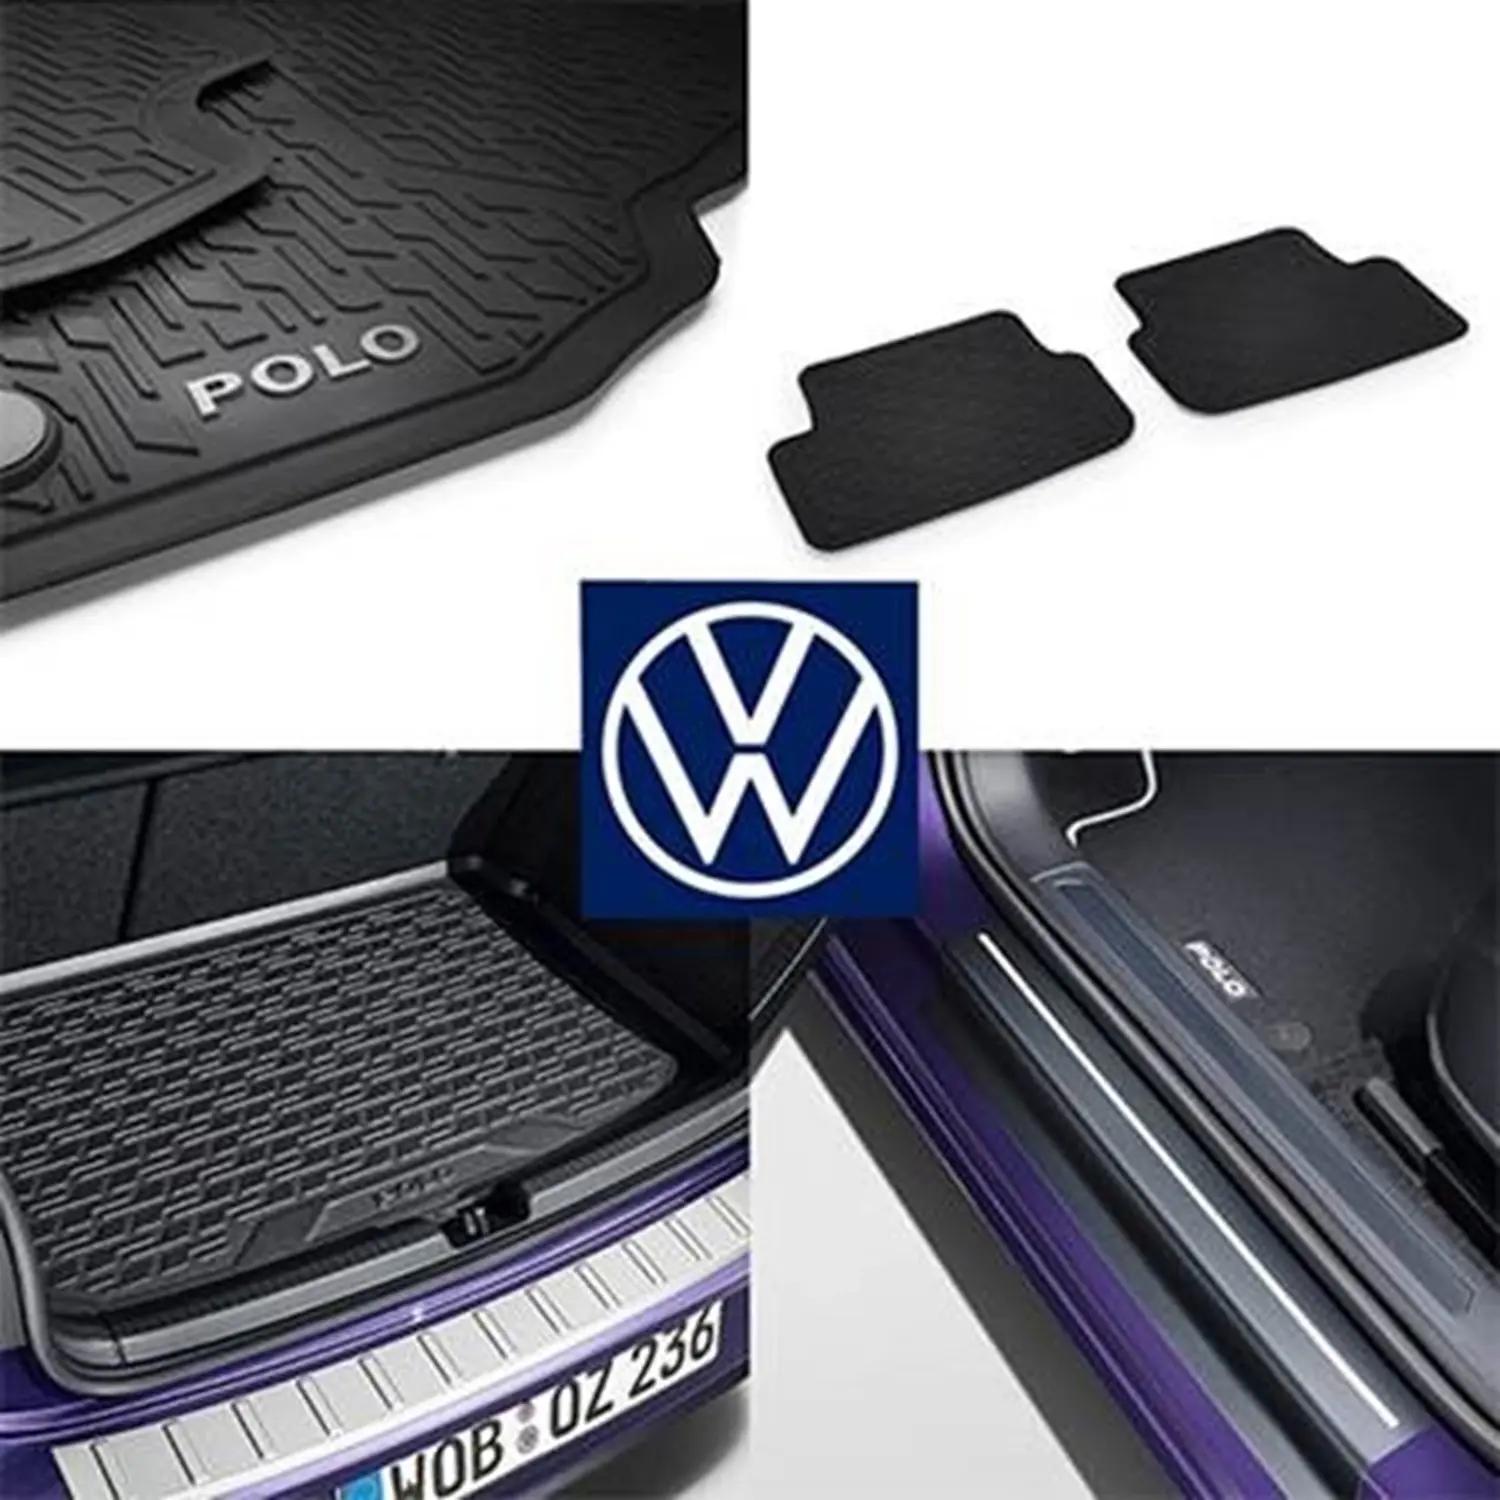 A selection of different Volkswagen Protection Packs for a Volkswagen Polo.